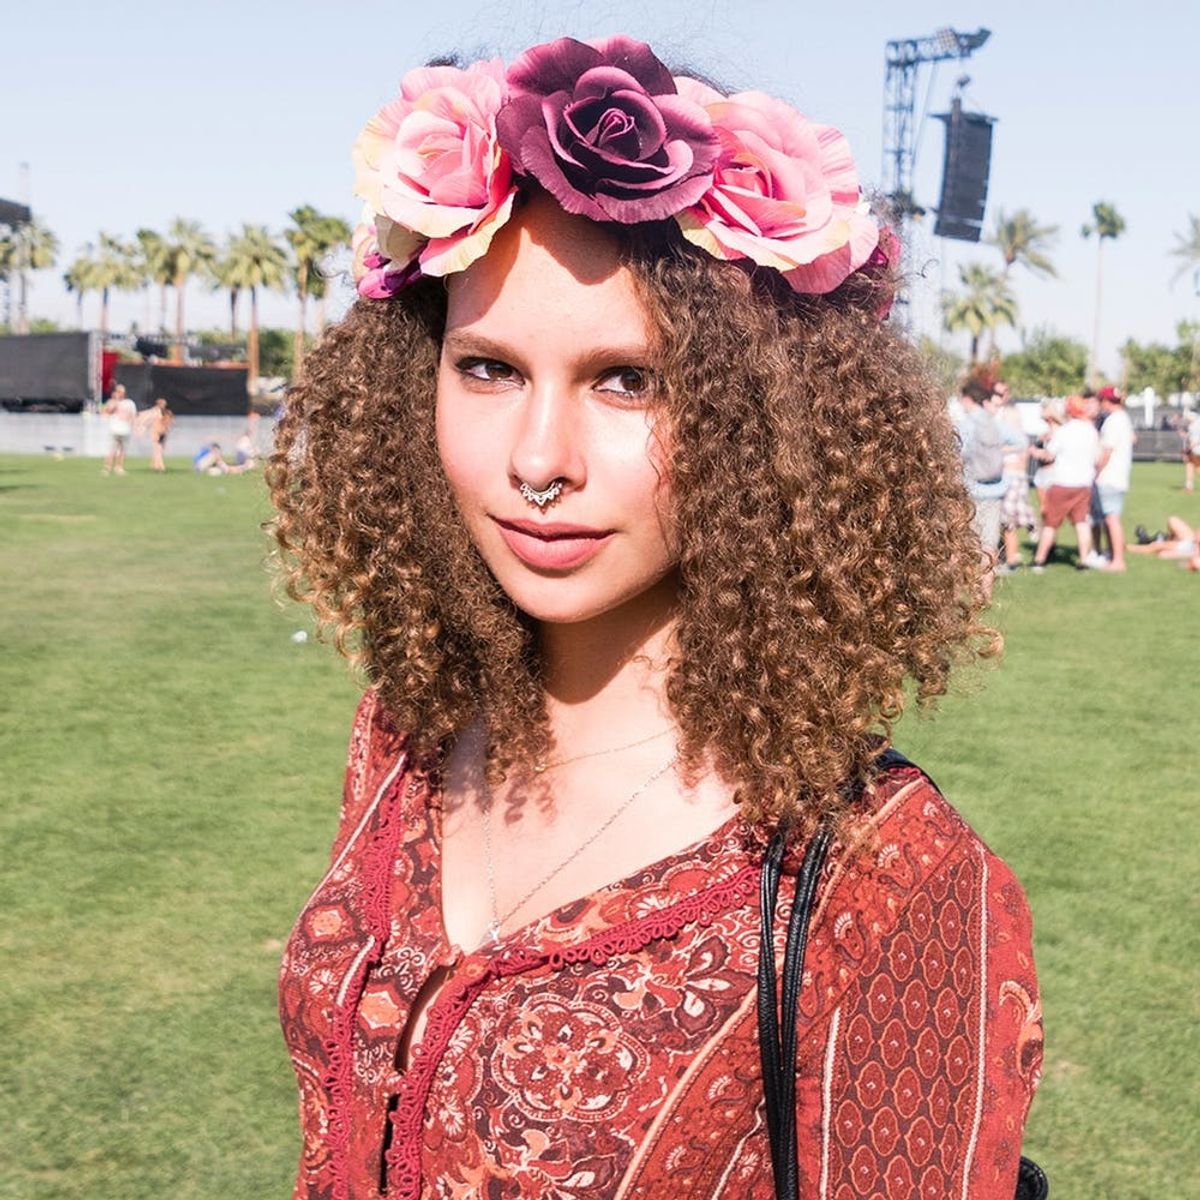 8 Ladies Who Defined DIY Festival Style at Coachella